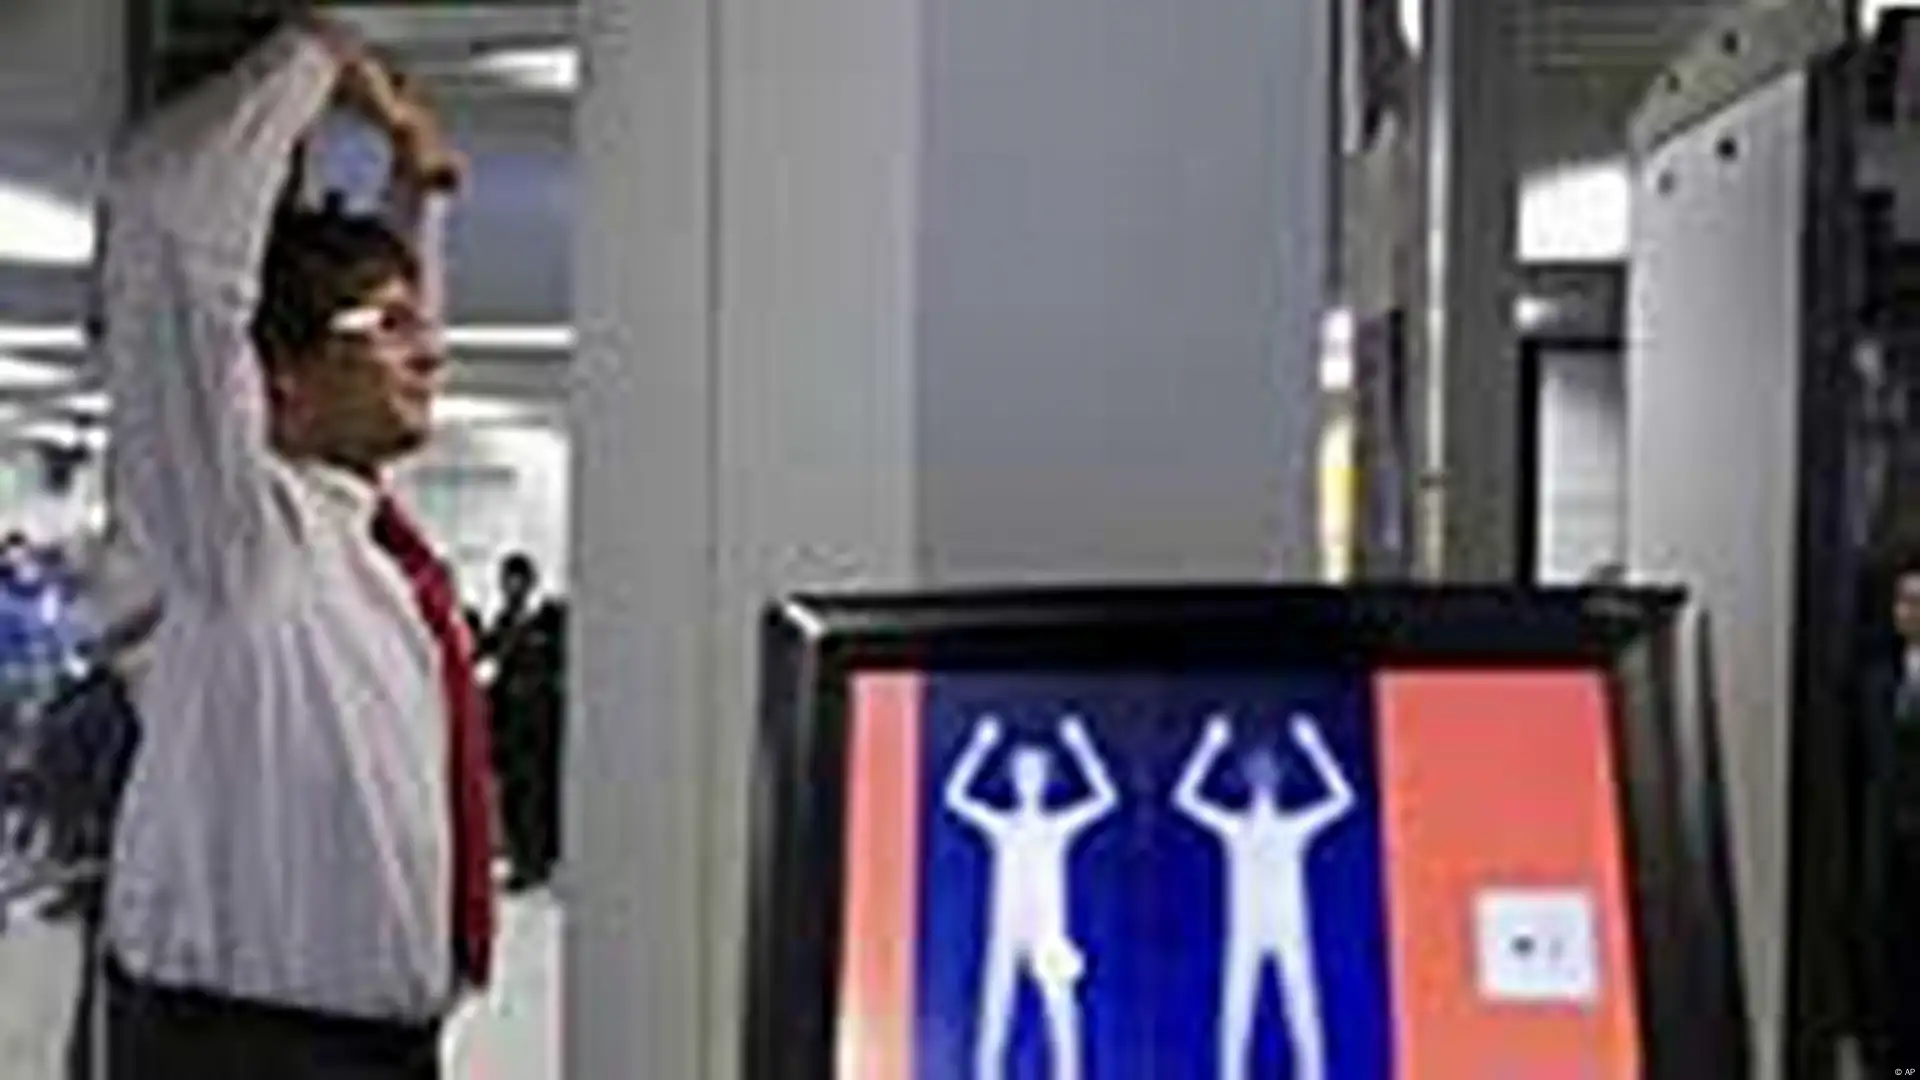 Got weapons? Nude body scanners easily defeated